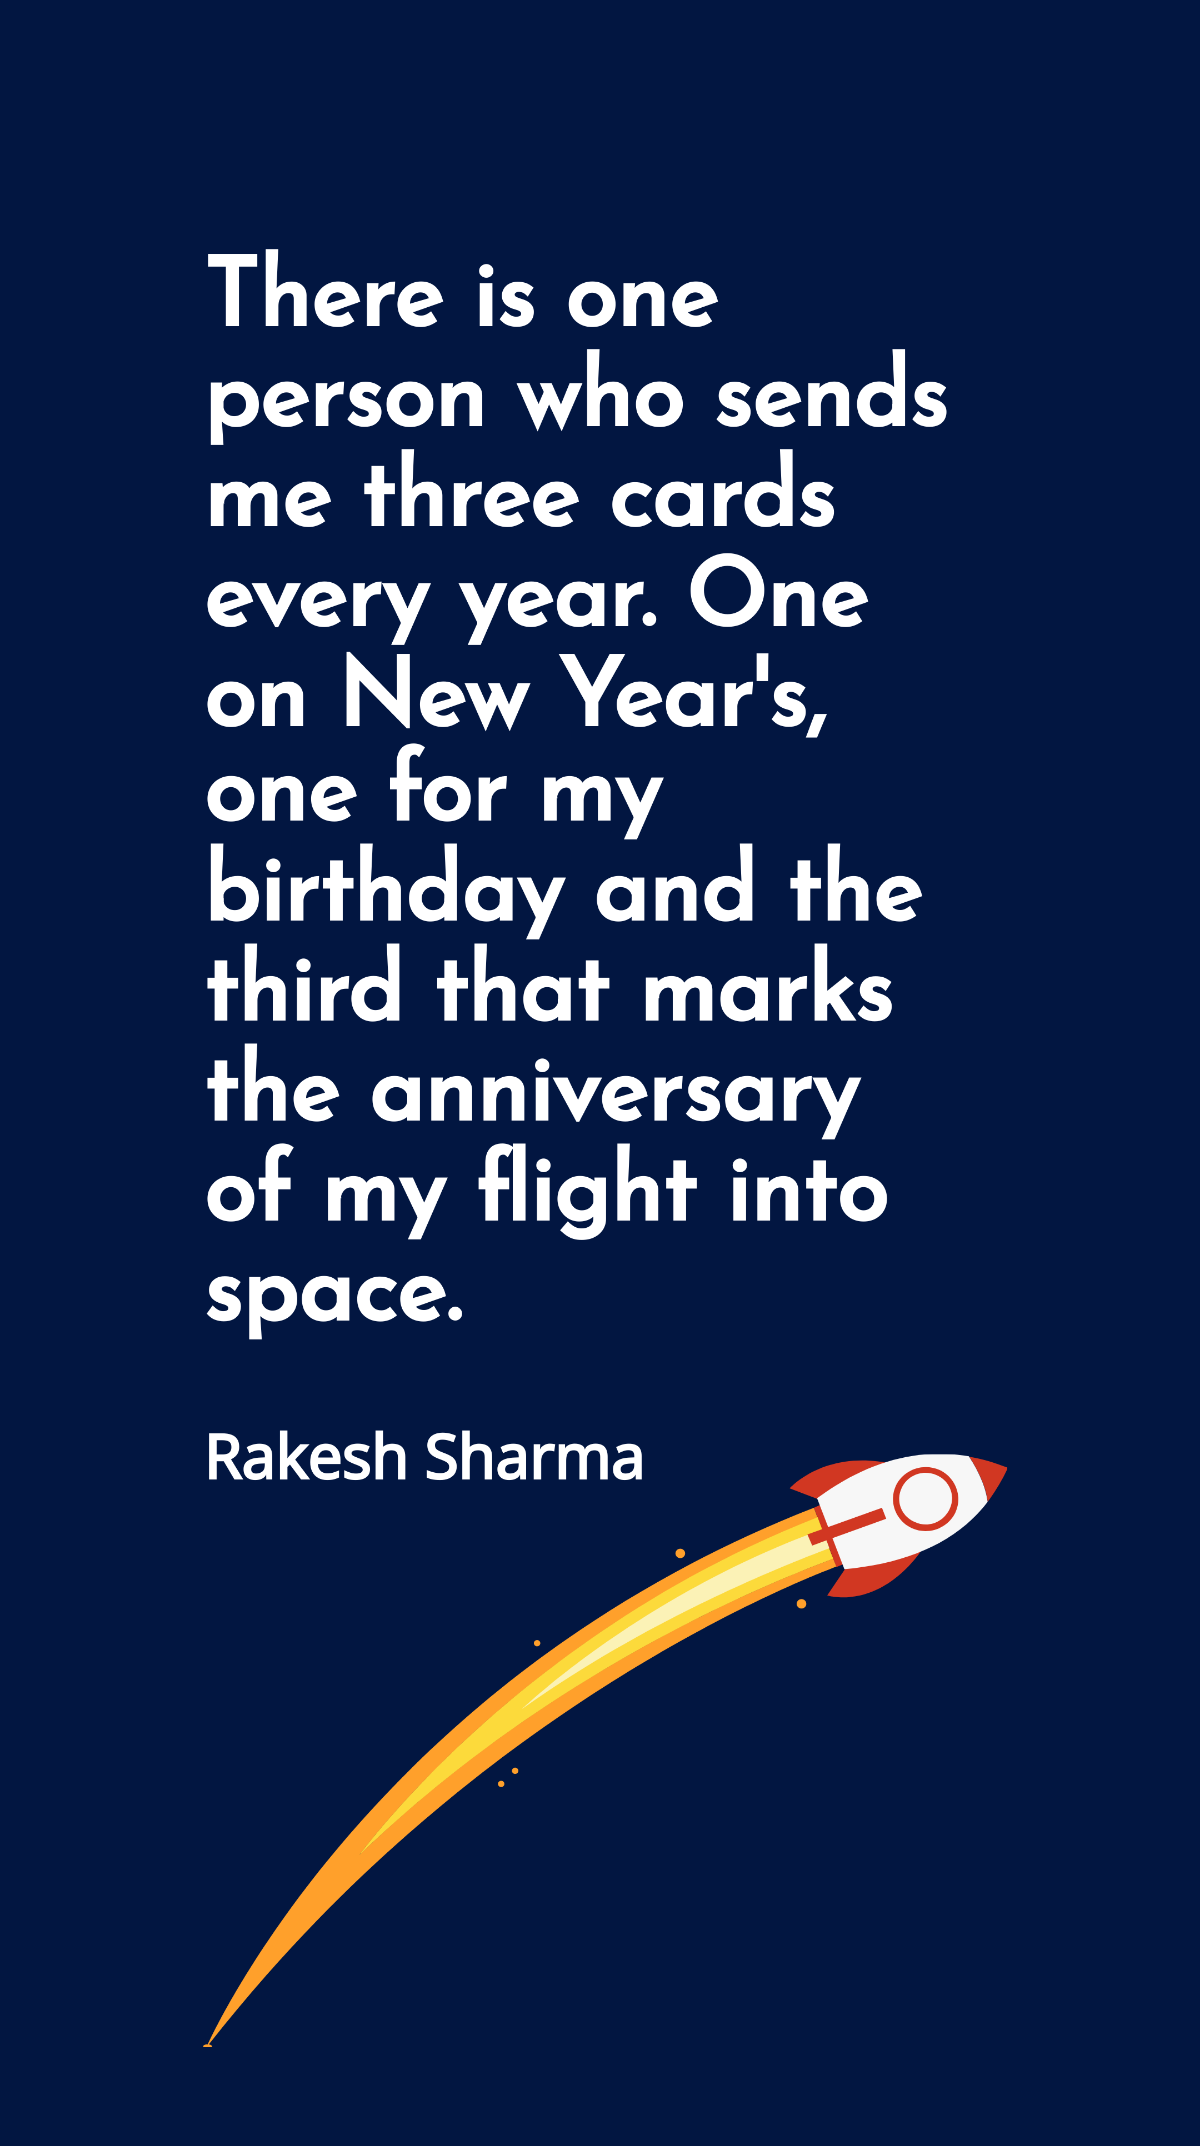 Rakesh Sharma - There is one person who sends me three cards every year. One on New Year's, one for my birthday and the third that marks the anniversary of my flight into space. Template